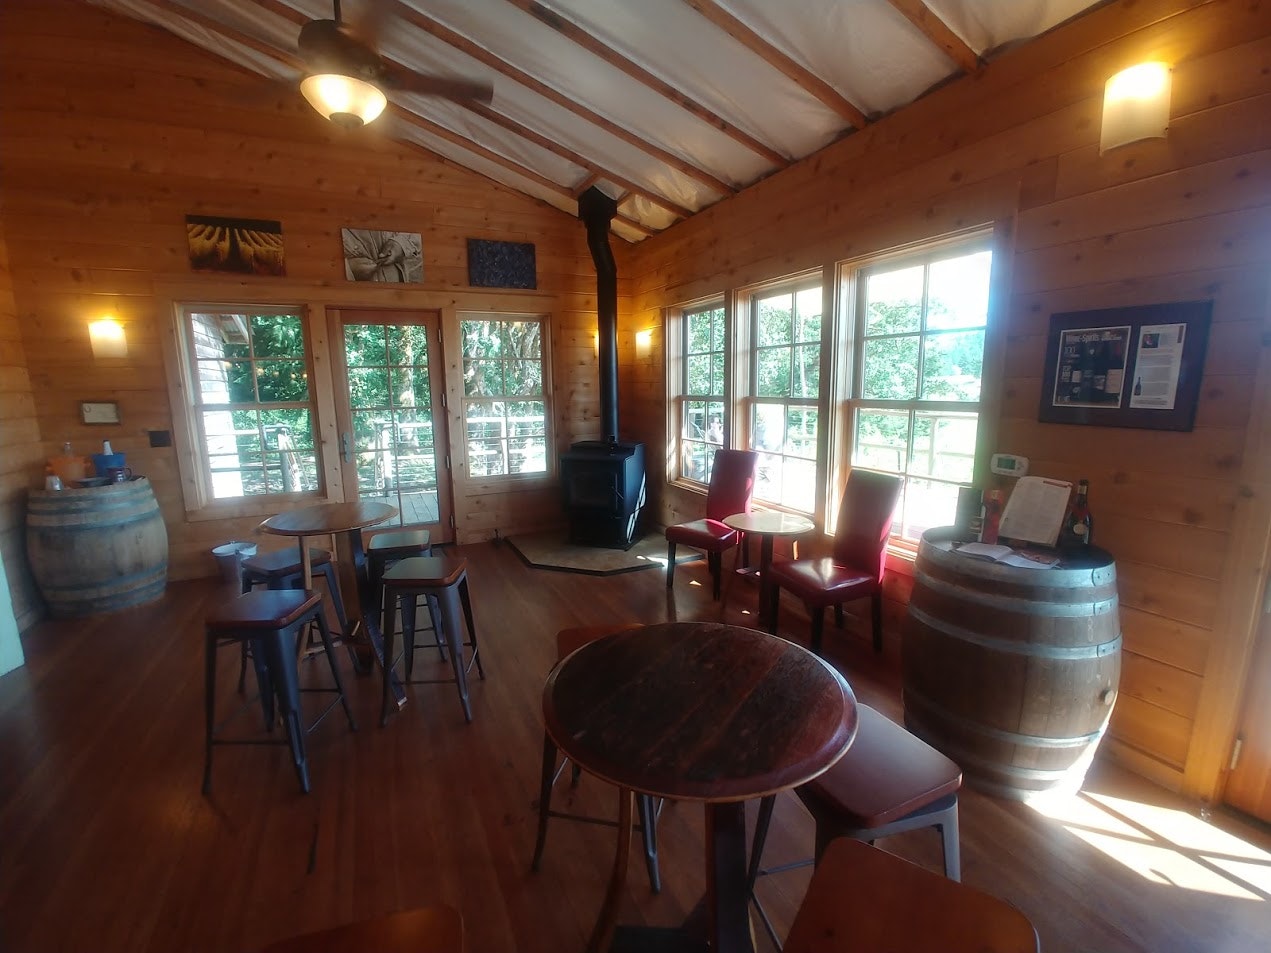 The warm and inviting interior of the Lumos Wine Company tasting room is made up on honey-wood plank walls and floor, with a cast iron wood stove in one corner and two high-top tables with pub stools in the room. Windows and a door look out on a deck around the building, while large wine barrels hold bottles and information booklets 